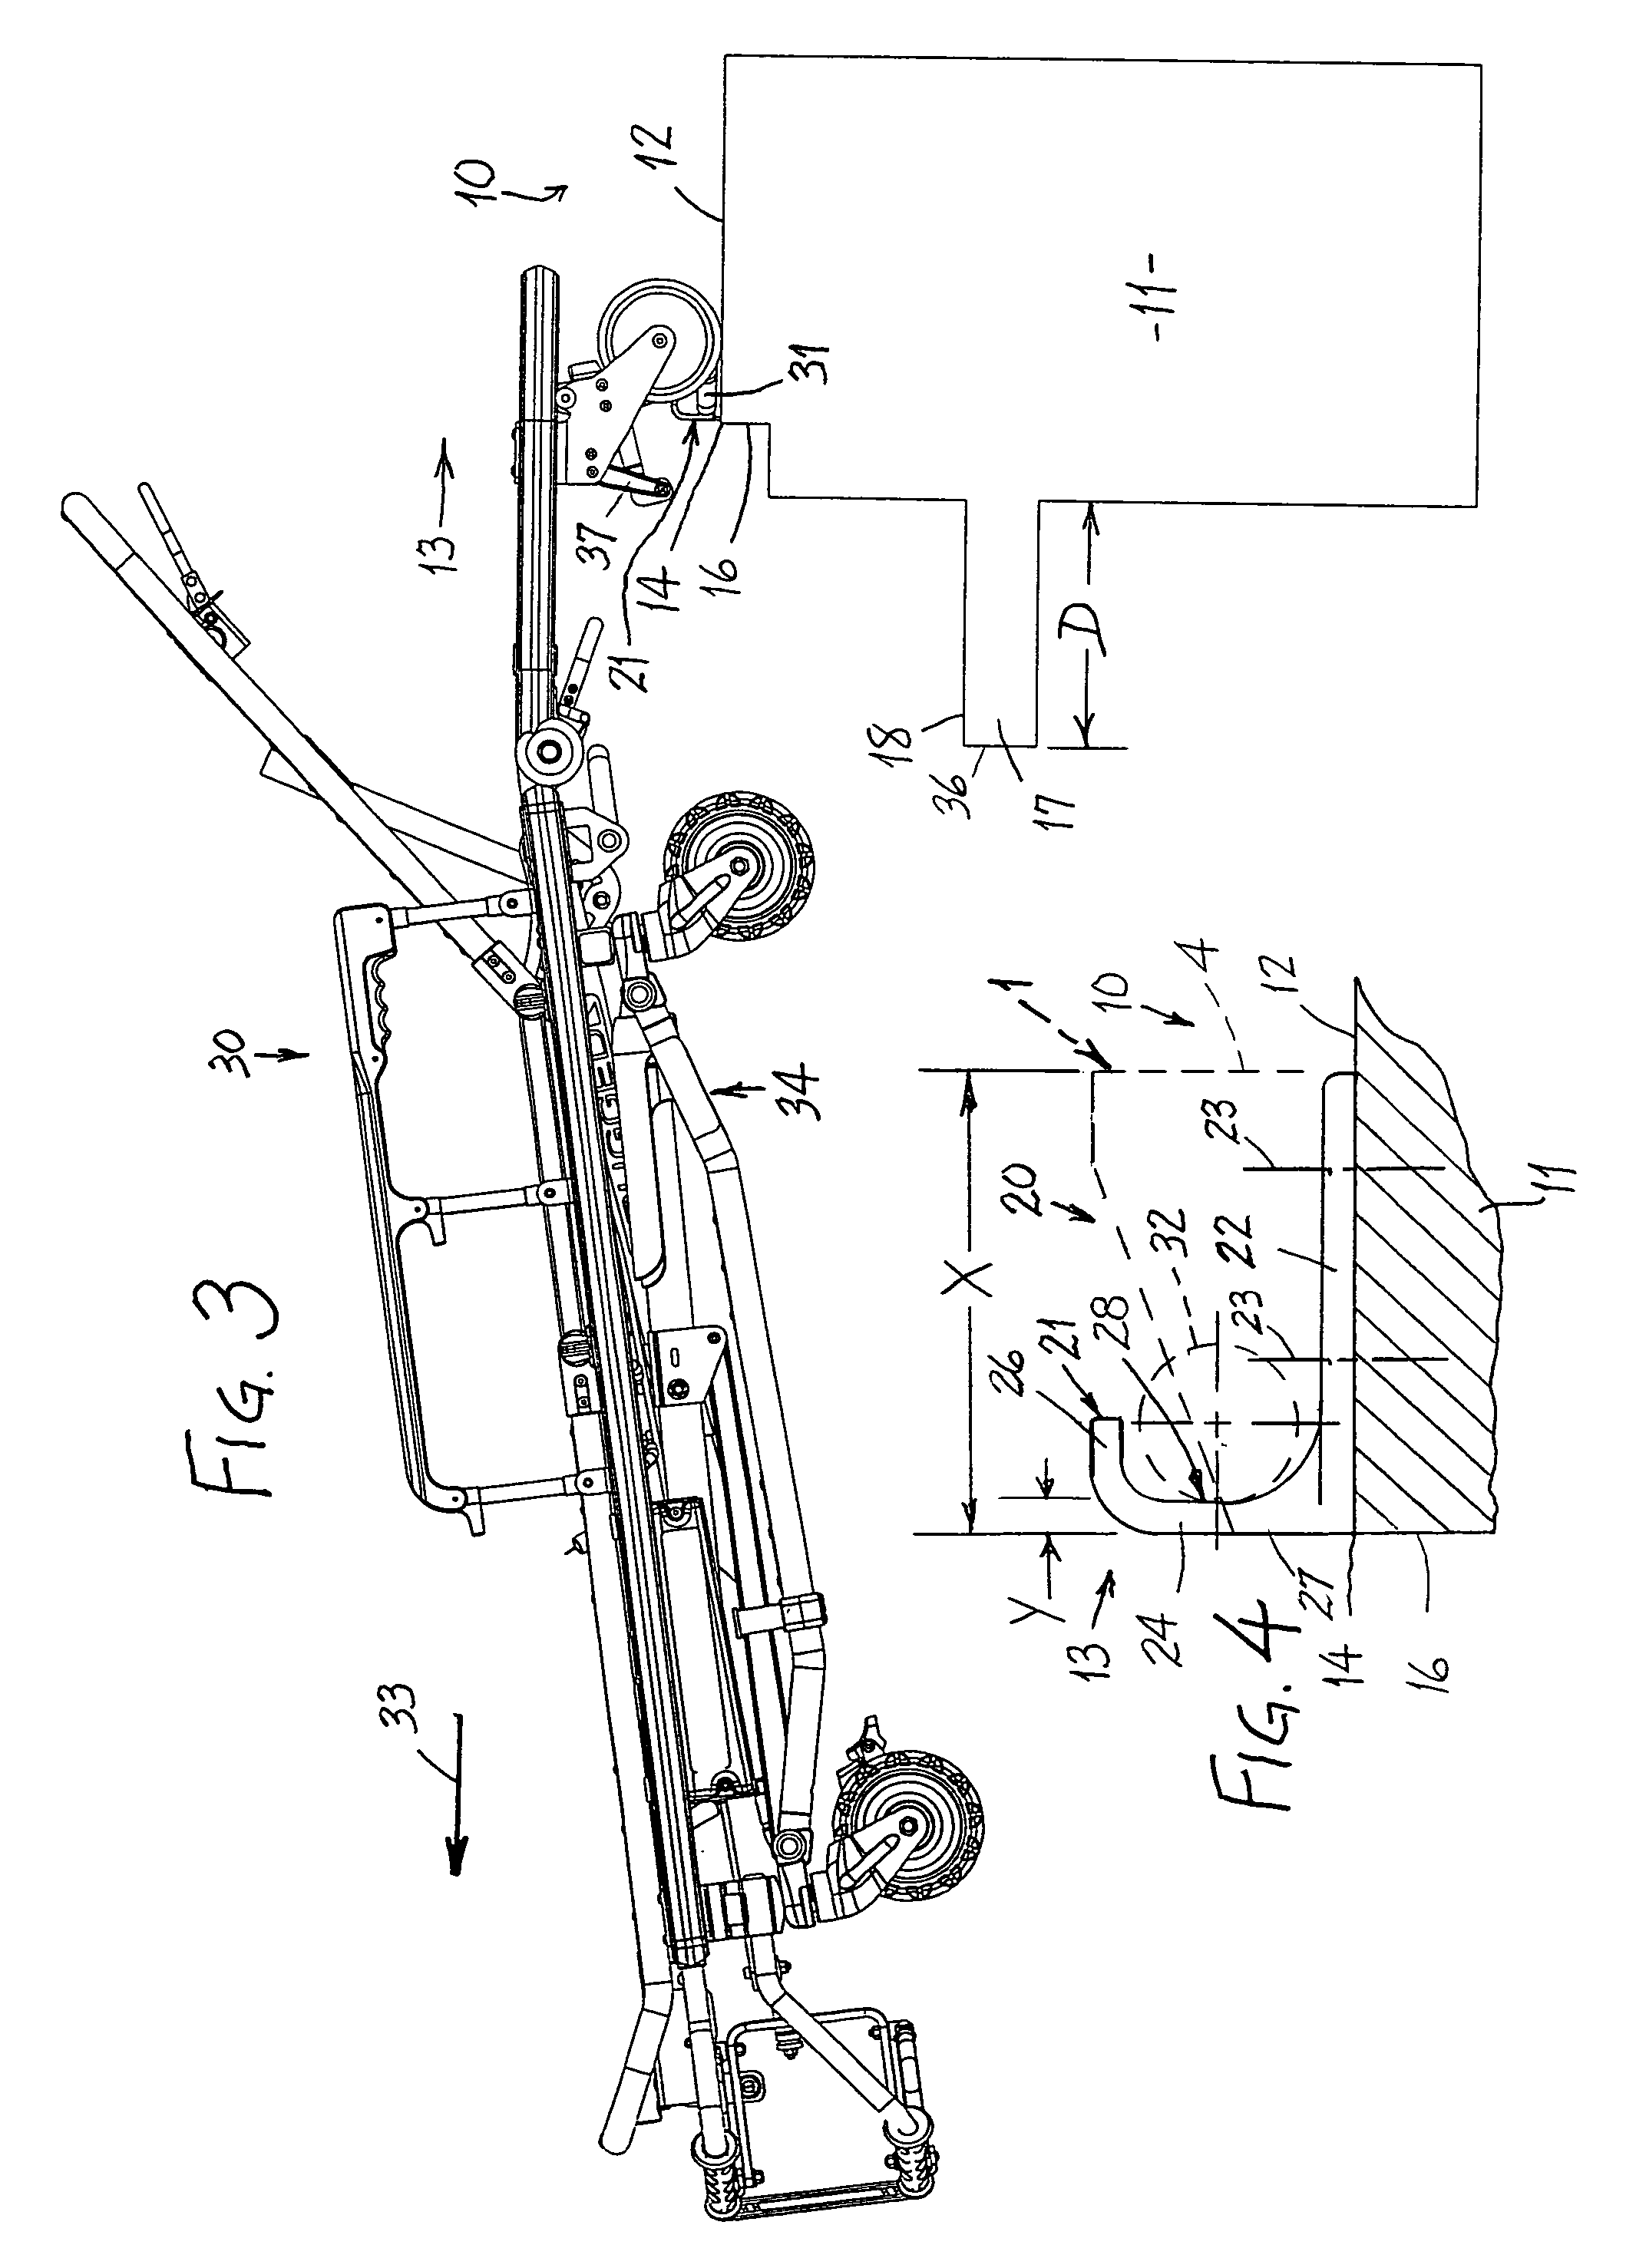 Device for preventing emergency vehicle bumper interference with cot wheel deployment